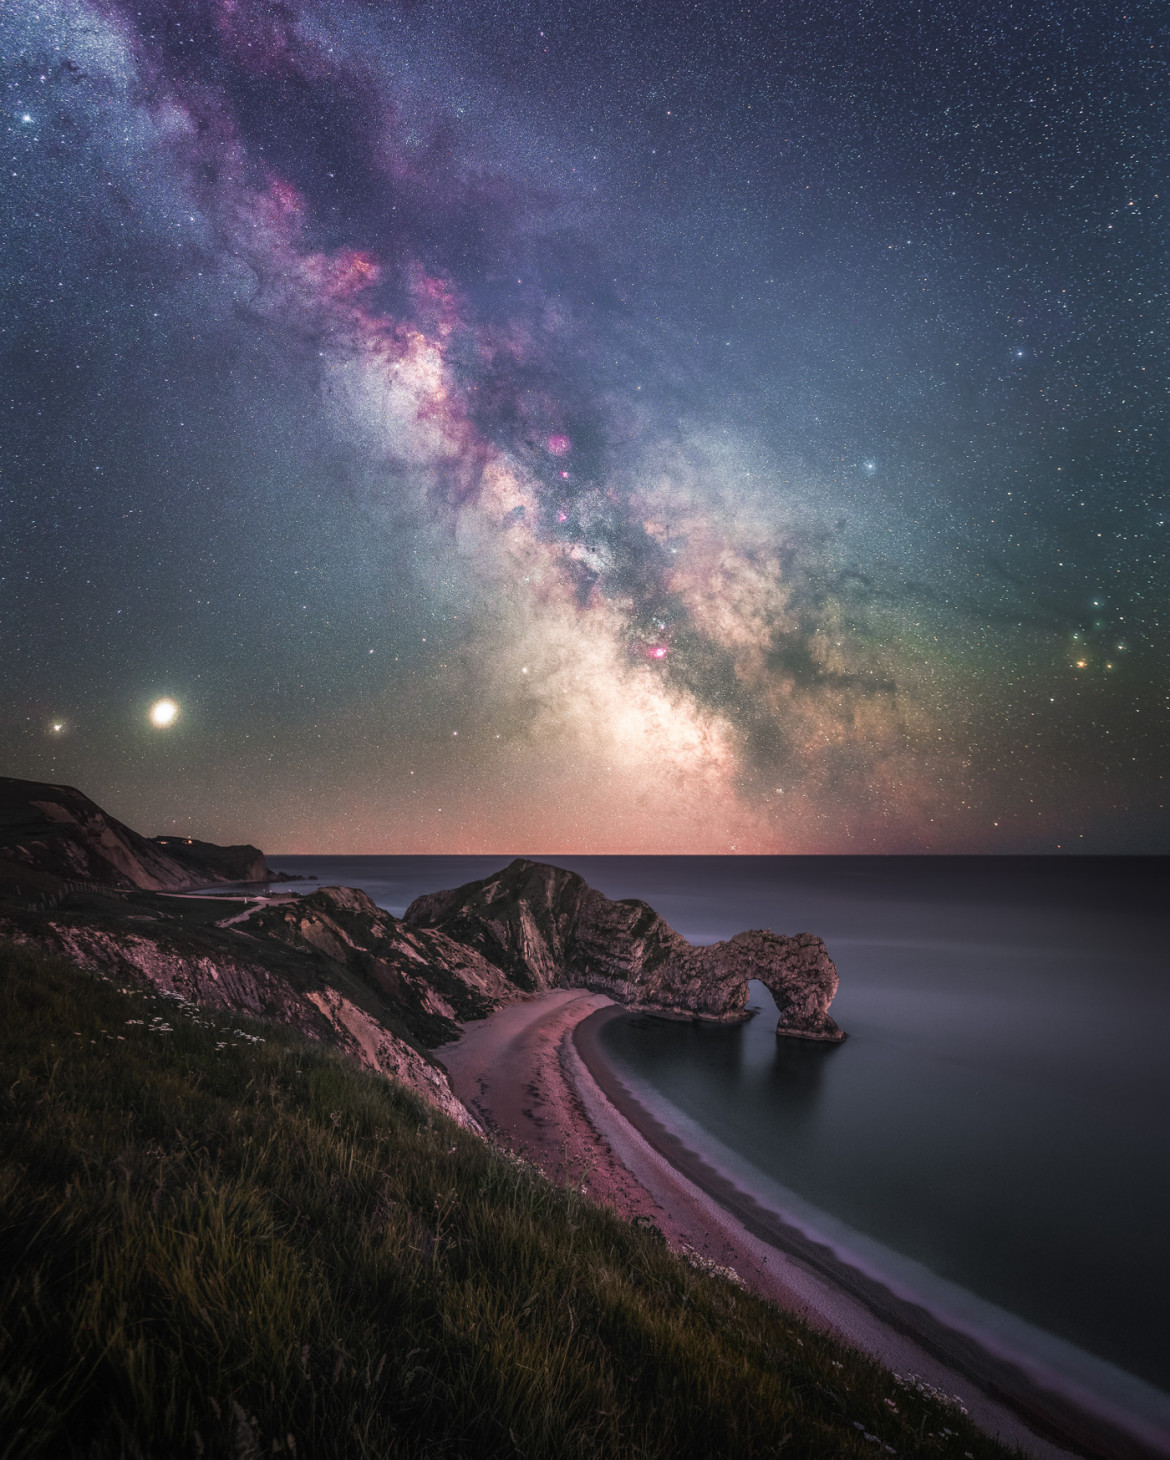 fot. Anthony Sullivan, "Milky Way rising over Durdle Door" / Astronomy Photographer of the Year 2021